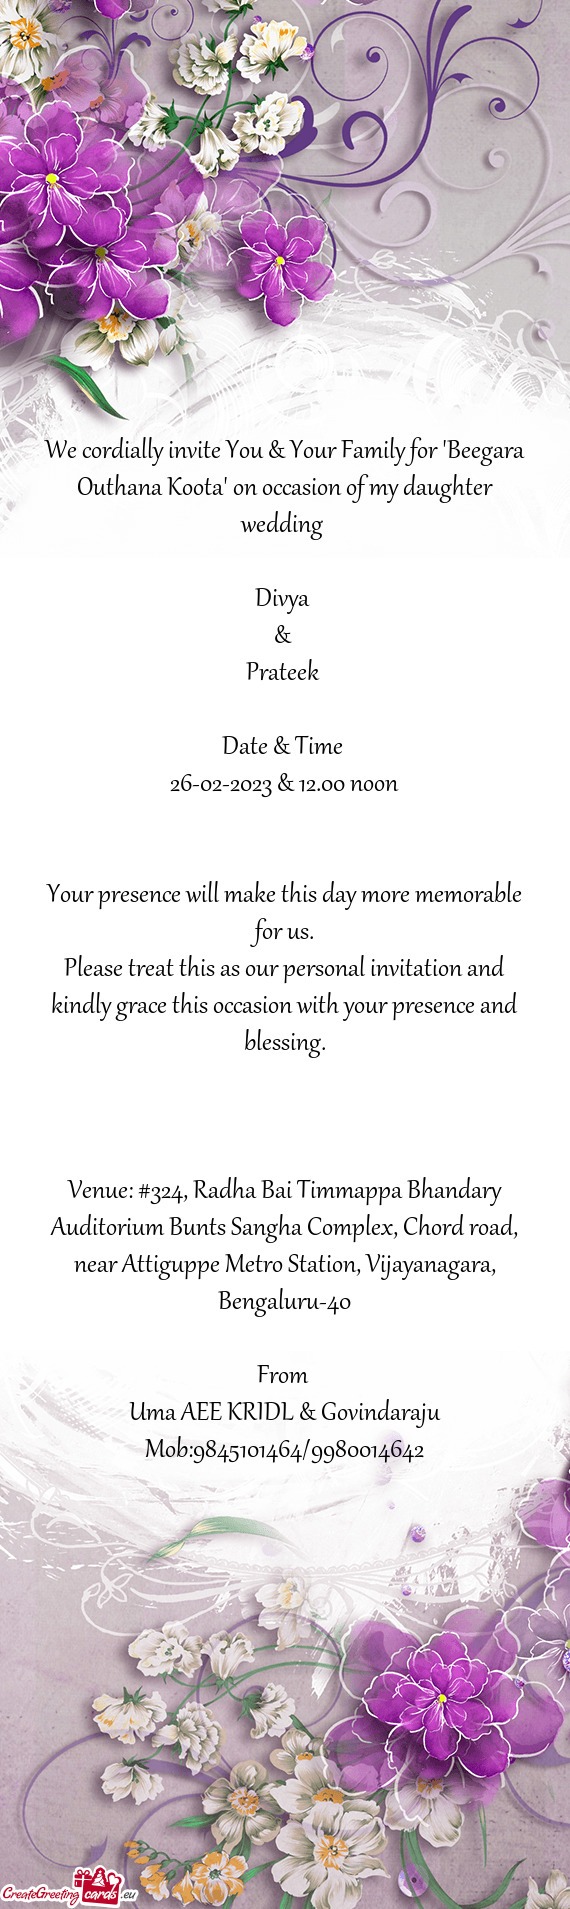 We cordially invite You & Your Family for "Beegara Outhana Koota" on occasion of my daughter wedding